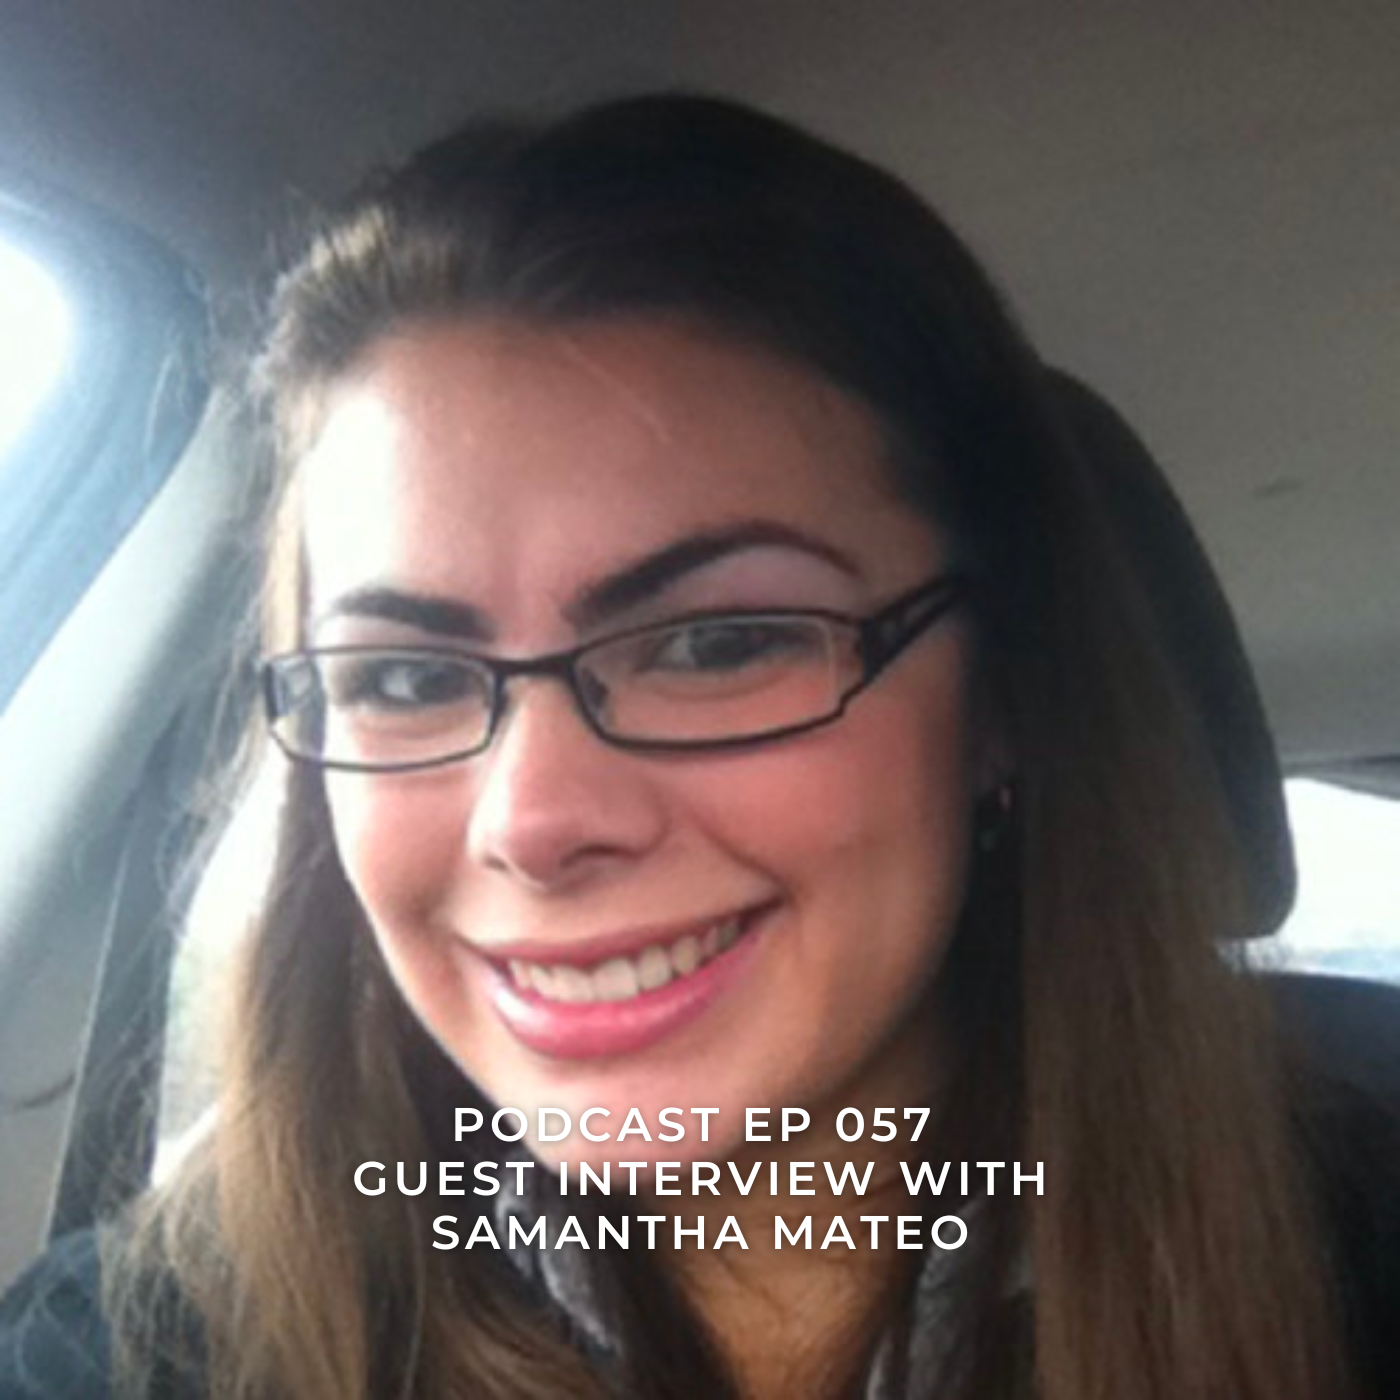 Guest Interview with Samantha Mateo